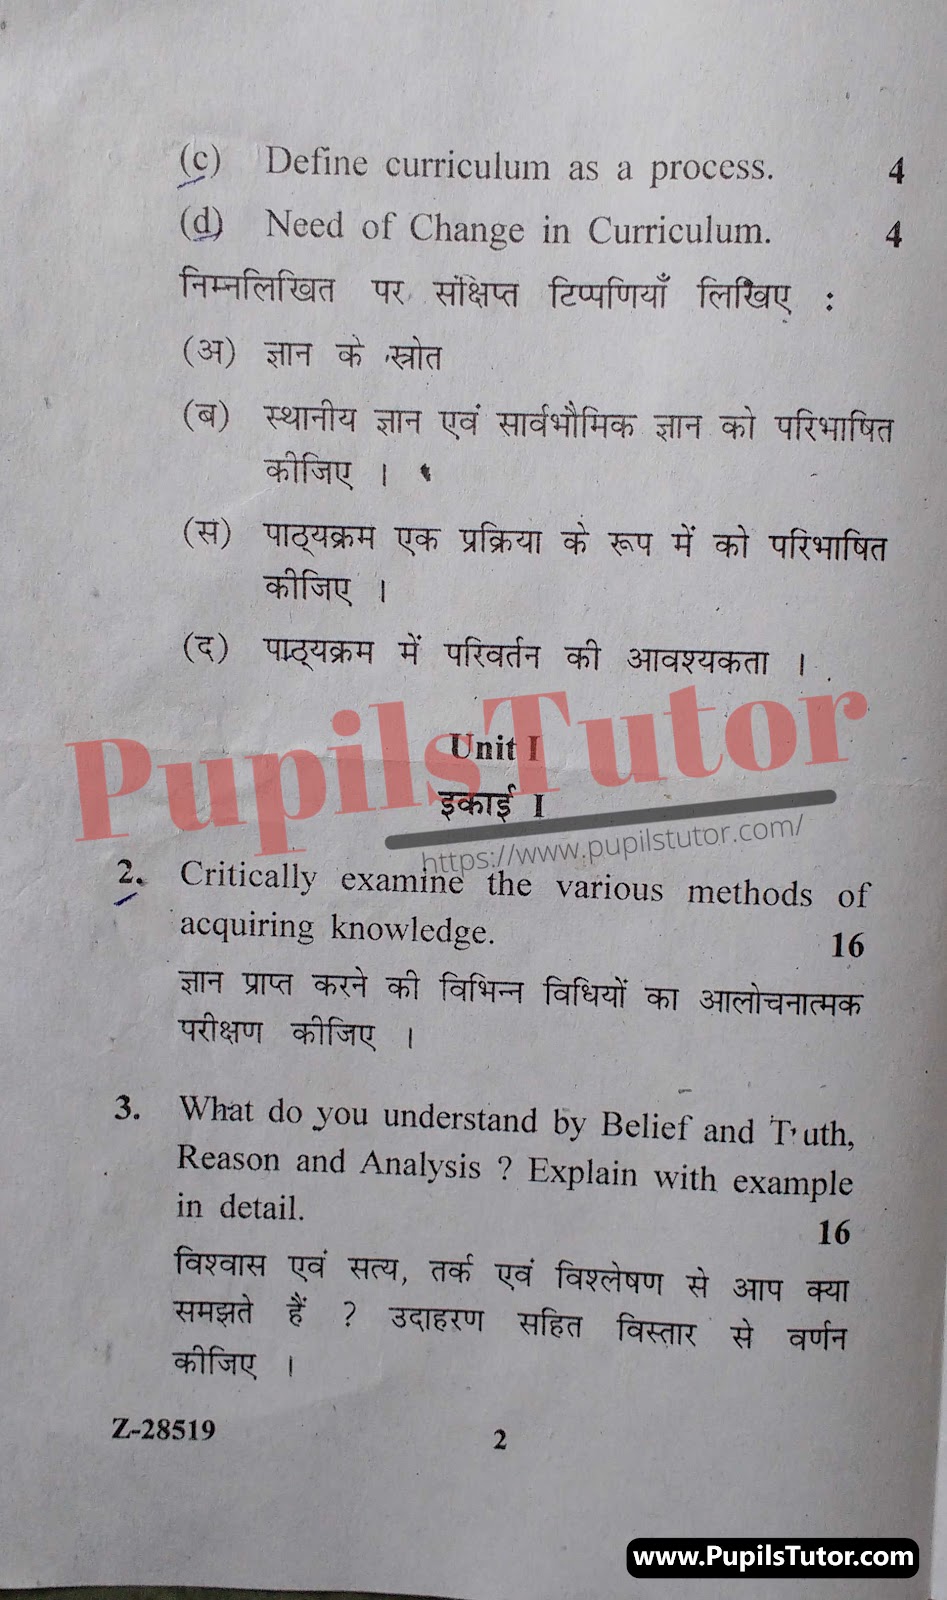 Chaudhary Ranbir Singh University (CRSU), Jind, Haryana B.Ed Knowledge And Curriculum Second Year Important Question Answer And Solution - www.pupilstutor.com (Paper Page Number 2)